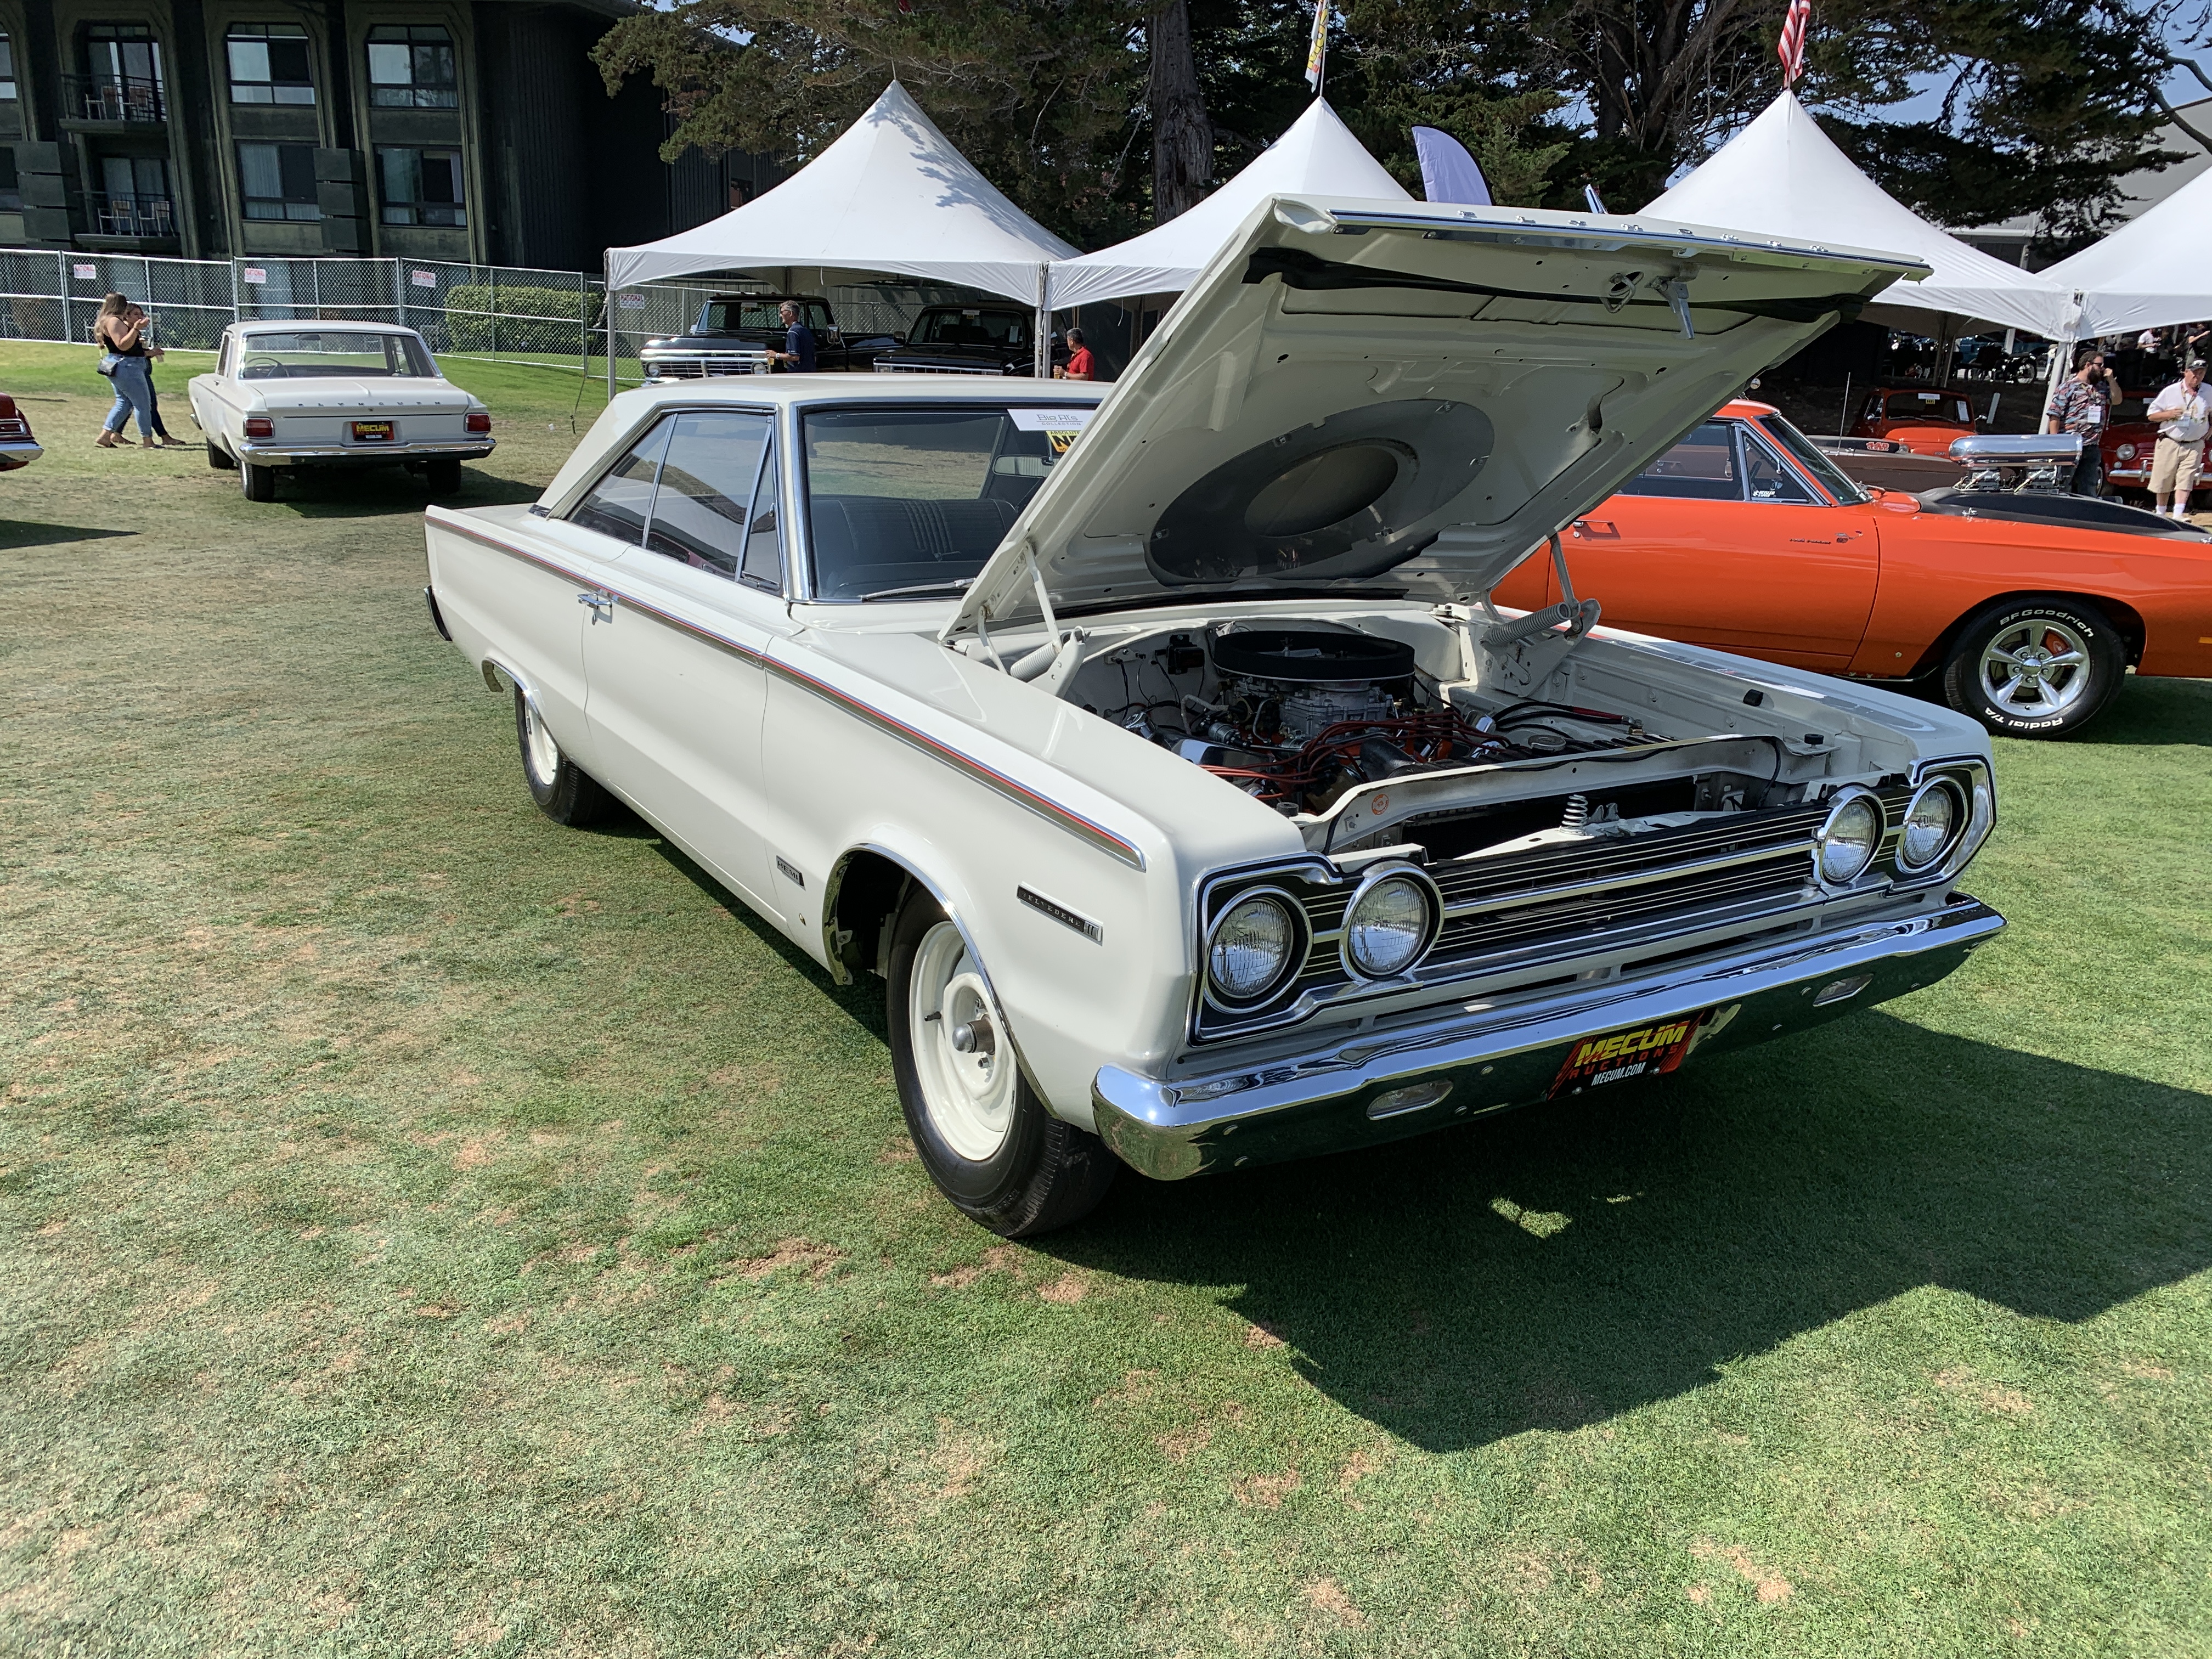 Find of the Day: This Rare 1967 Plymouth Belvedere II has a 426